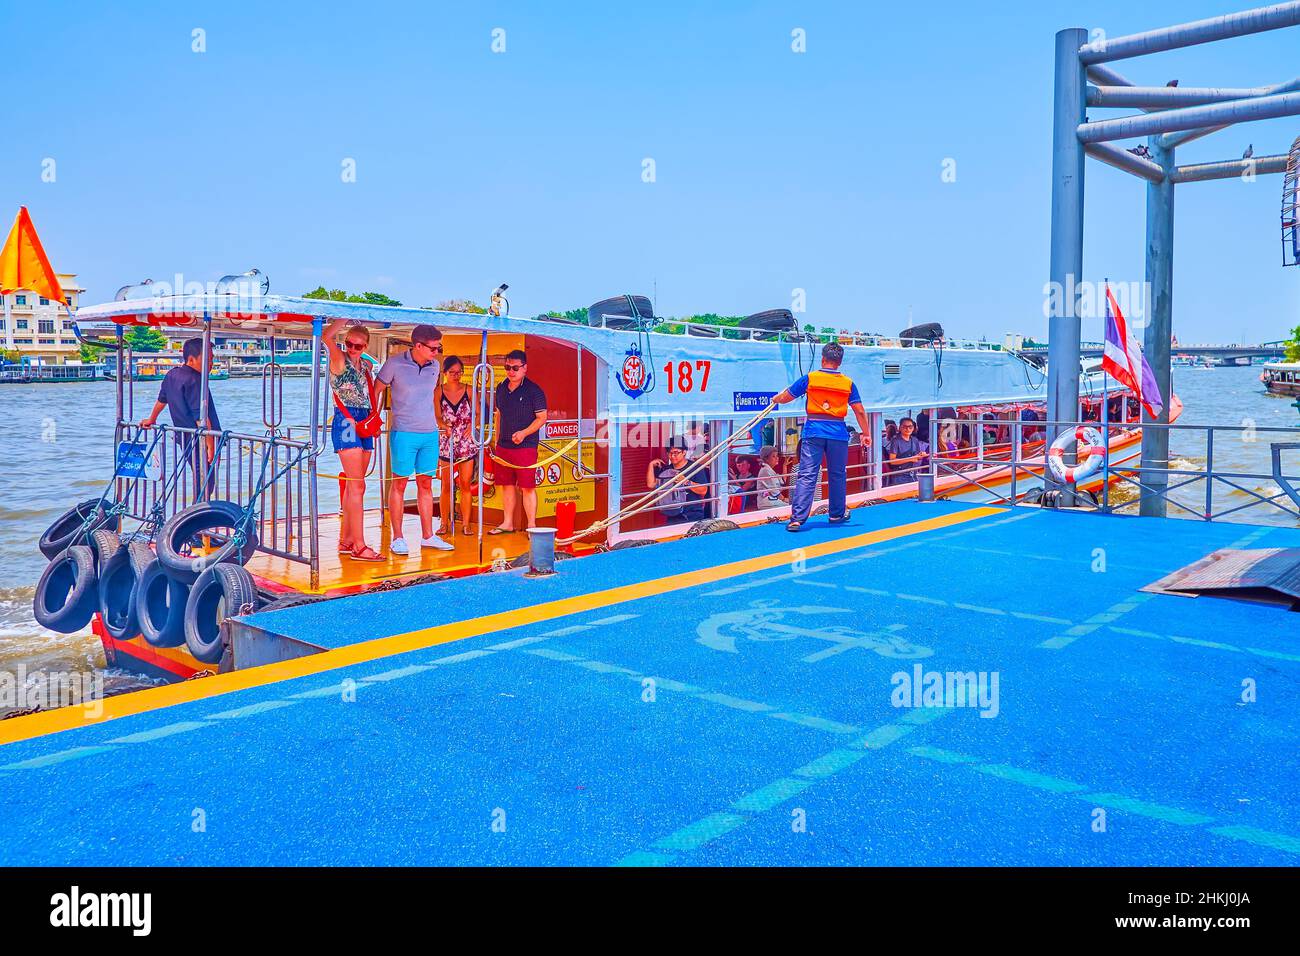 BANGKOK, THAILAND - MAY 12, 2019: Arriving of the passenger ferry on Chao Phraya River with embarkation of passengers to the pontoon pier, on May 12 i Stock Photo